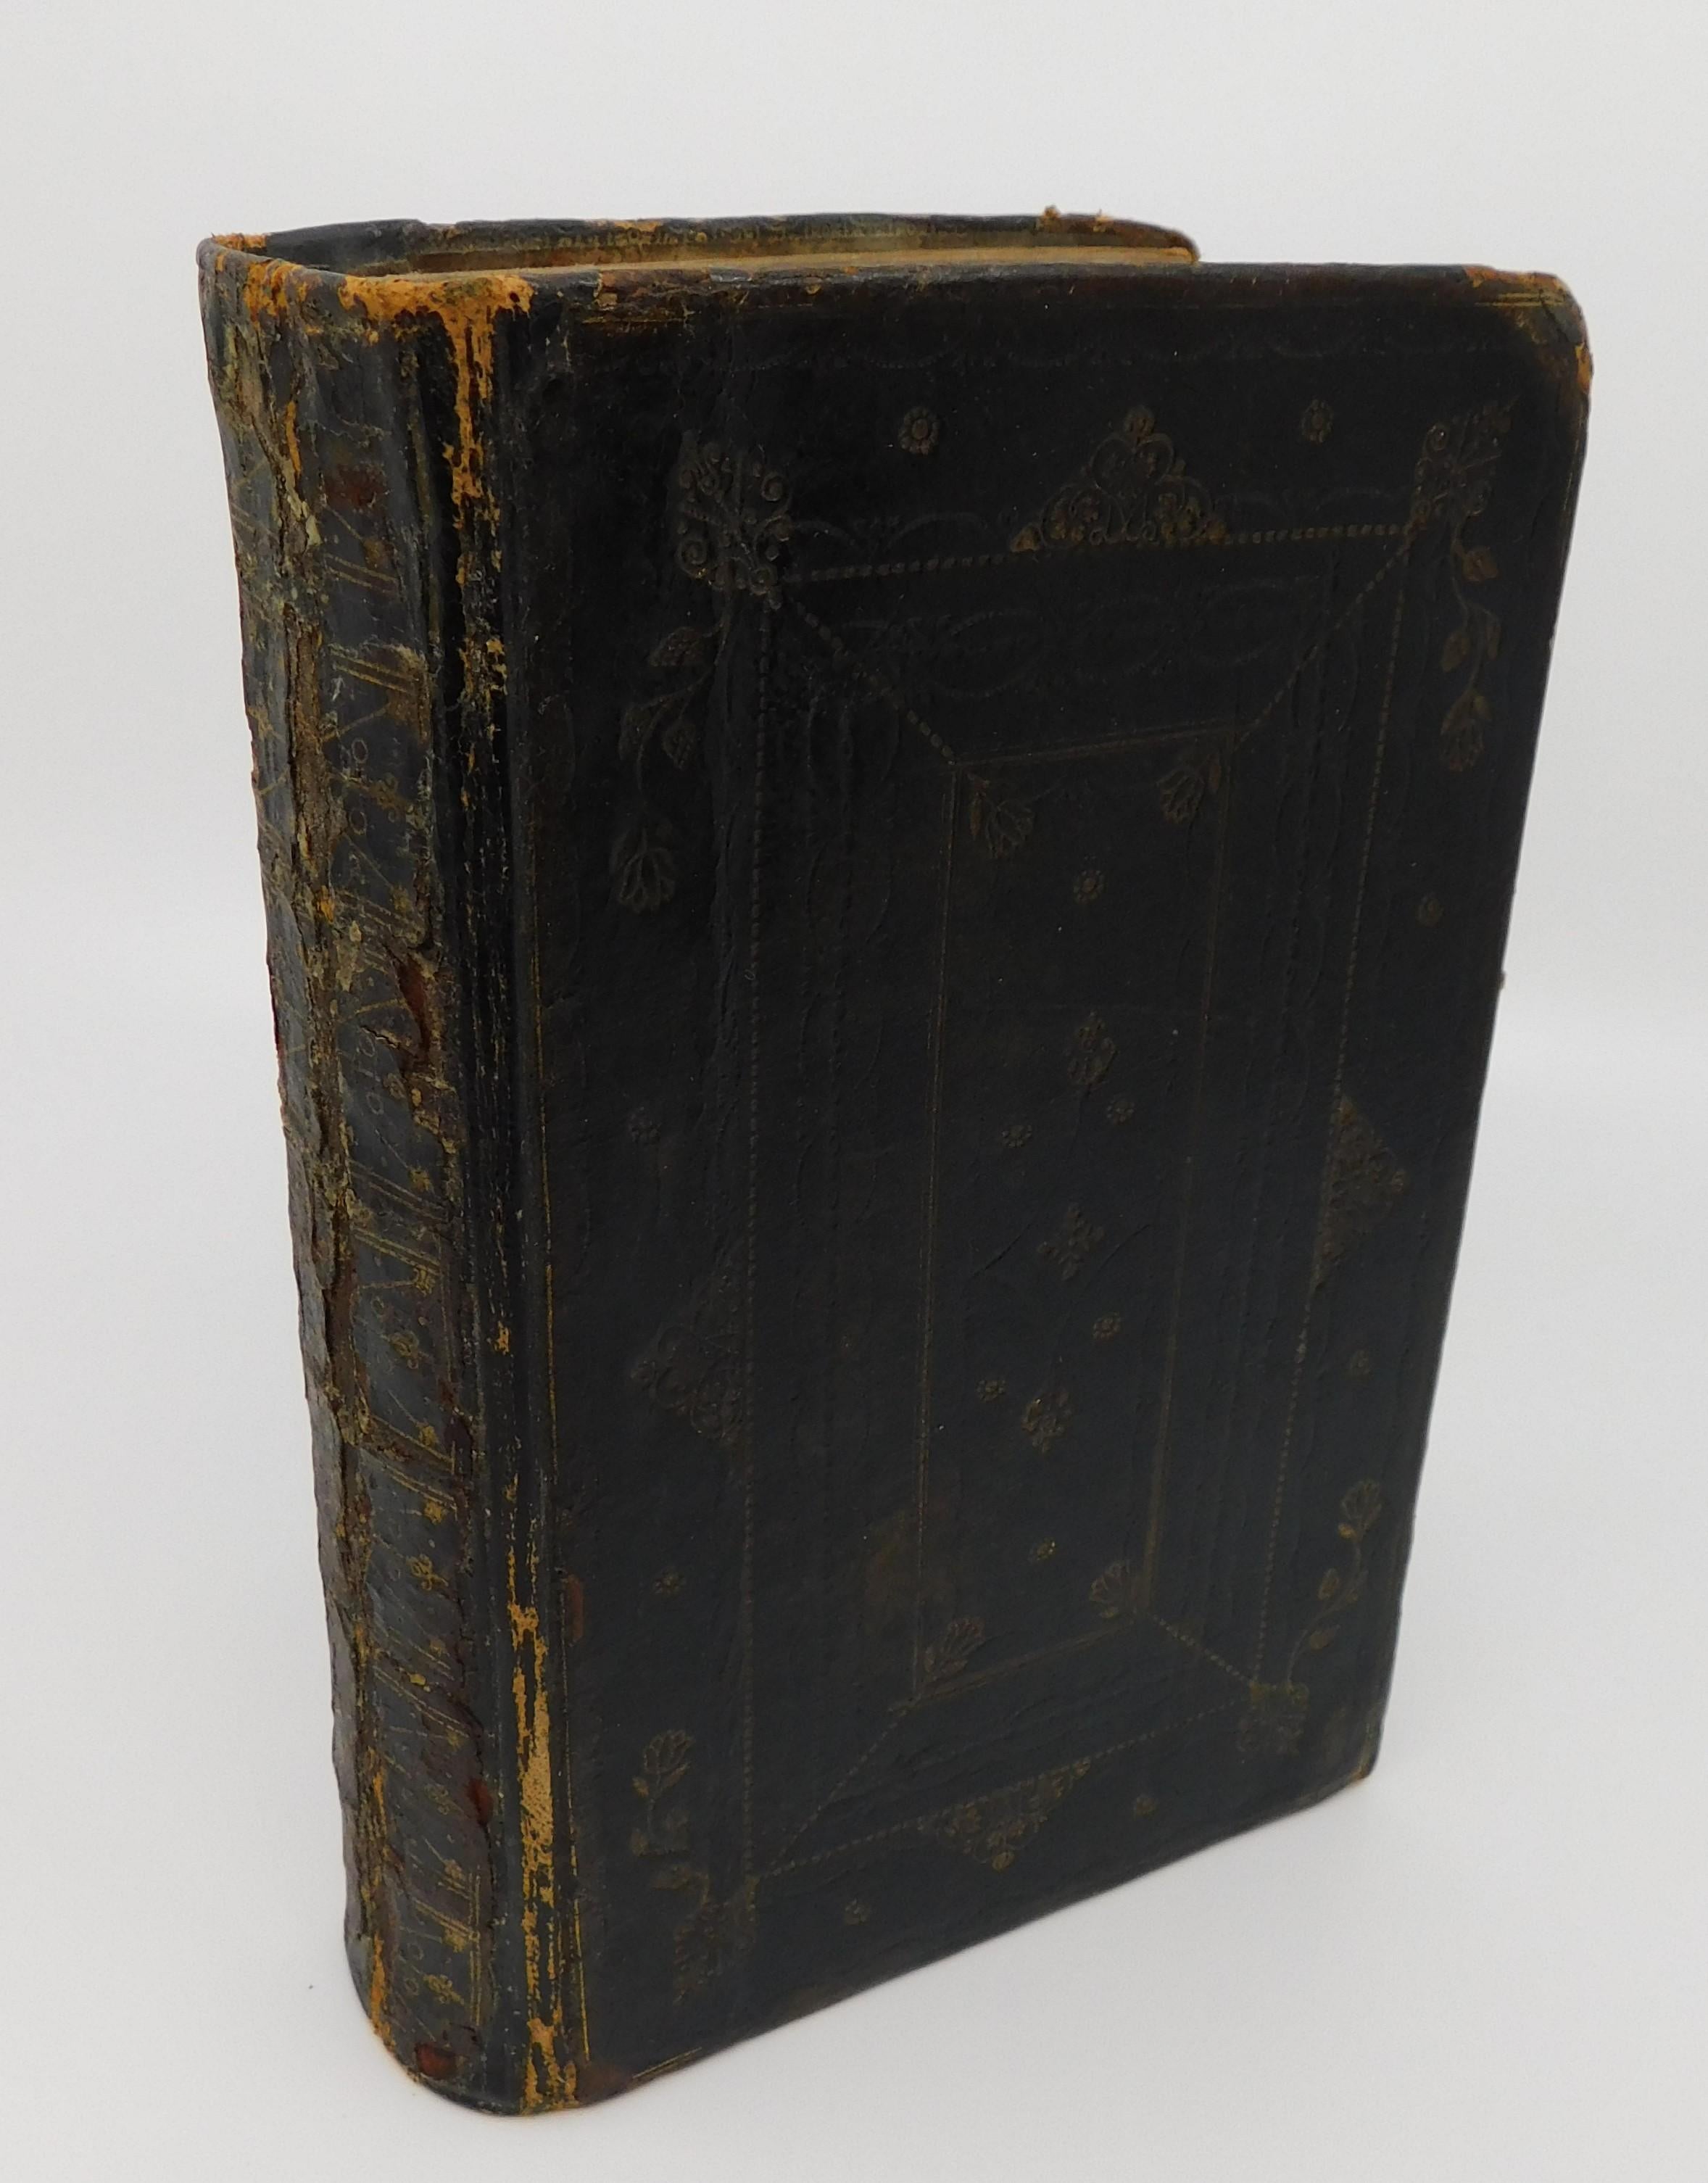 The Book of Common Prayer printed in 1707, printers to Queen Anne of Great Britain according to the Church of England, London. With lots of hand colored picture plates, leather bound cover. Good condition considering it is over 300 years old, see